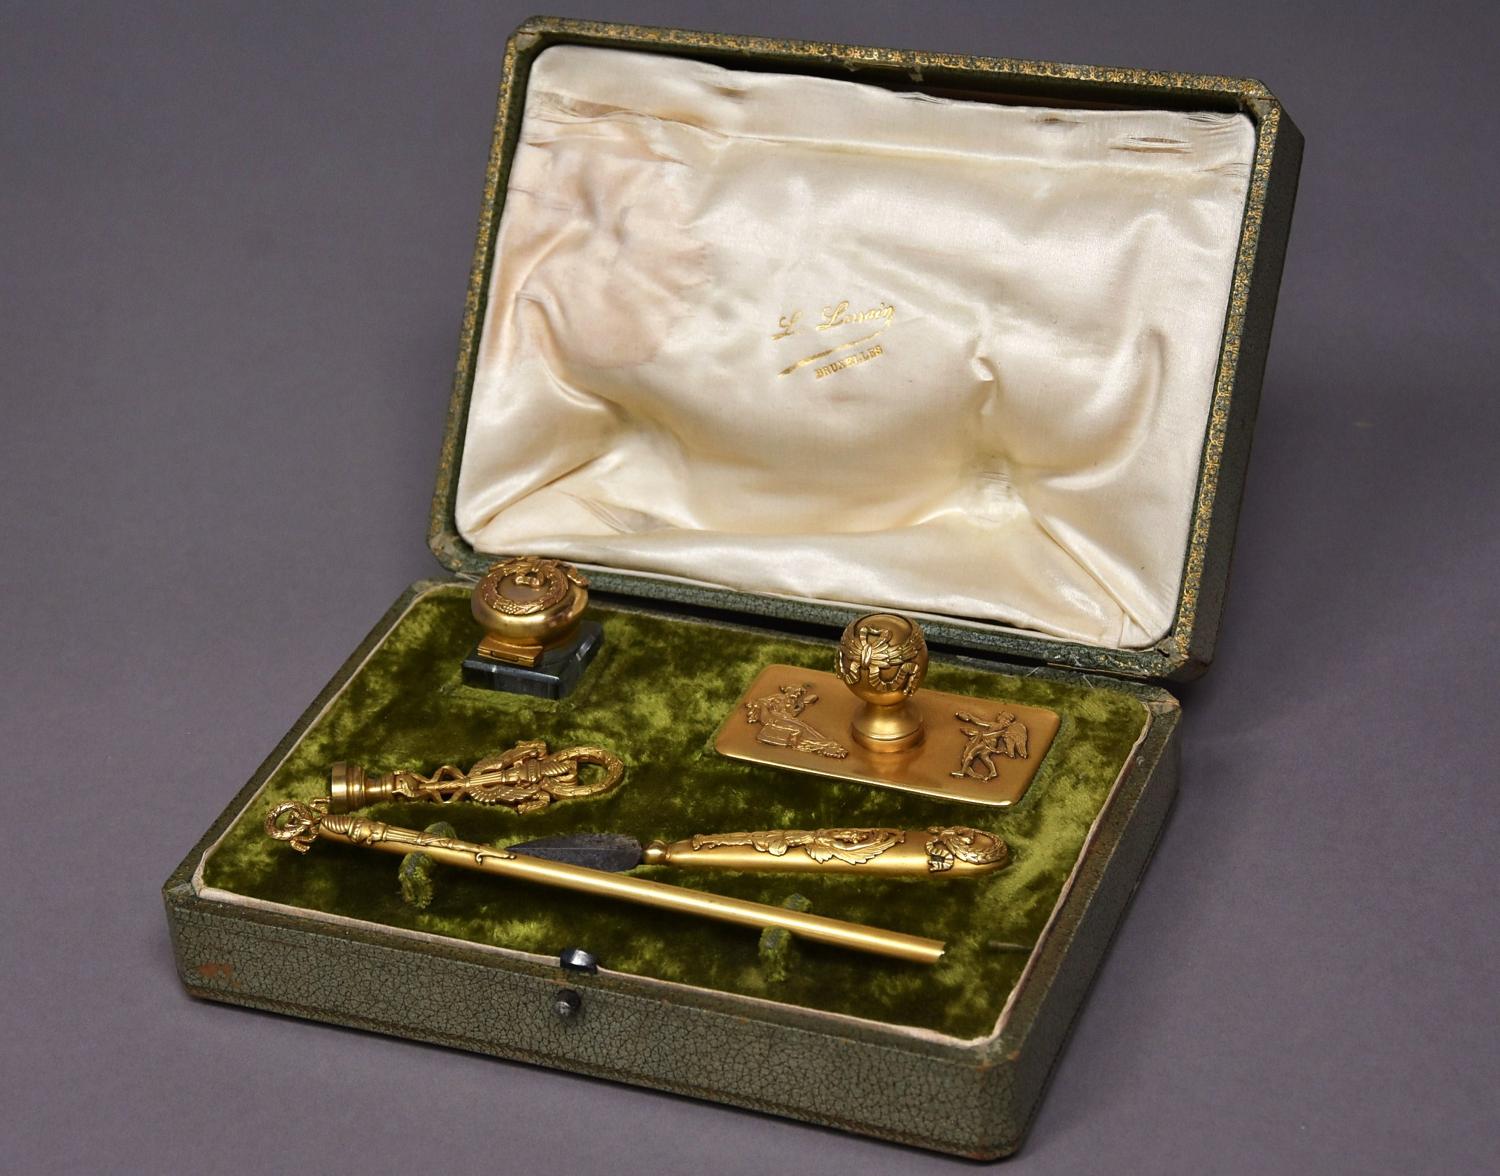 Superb quality five piece gilt metal writing set in the Empire style